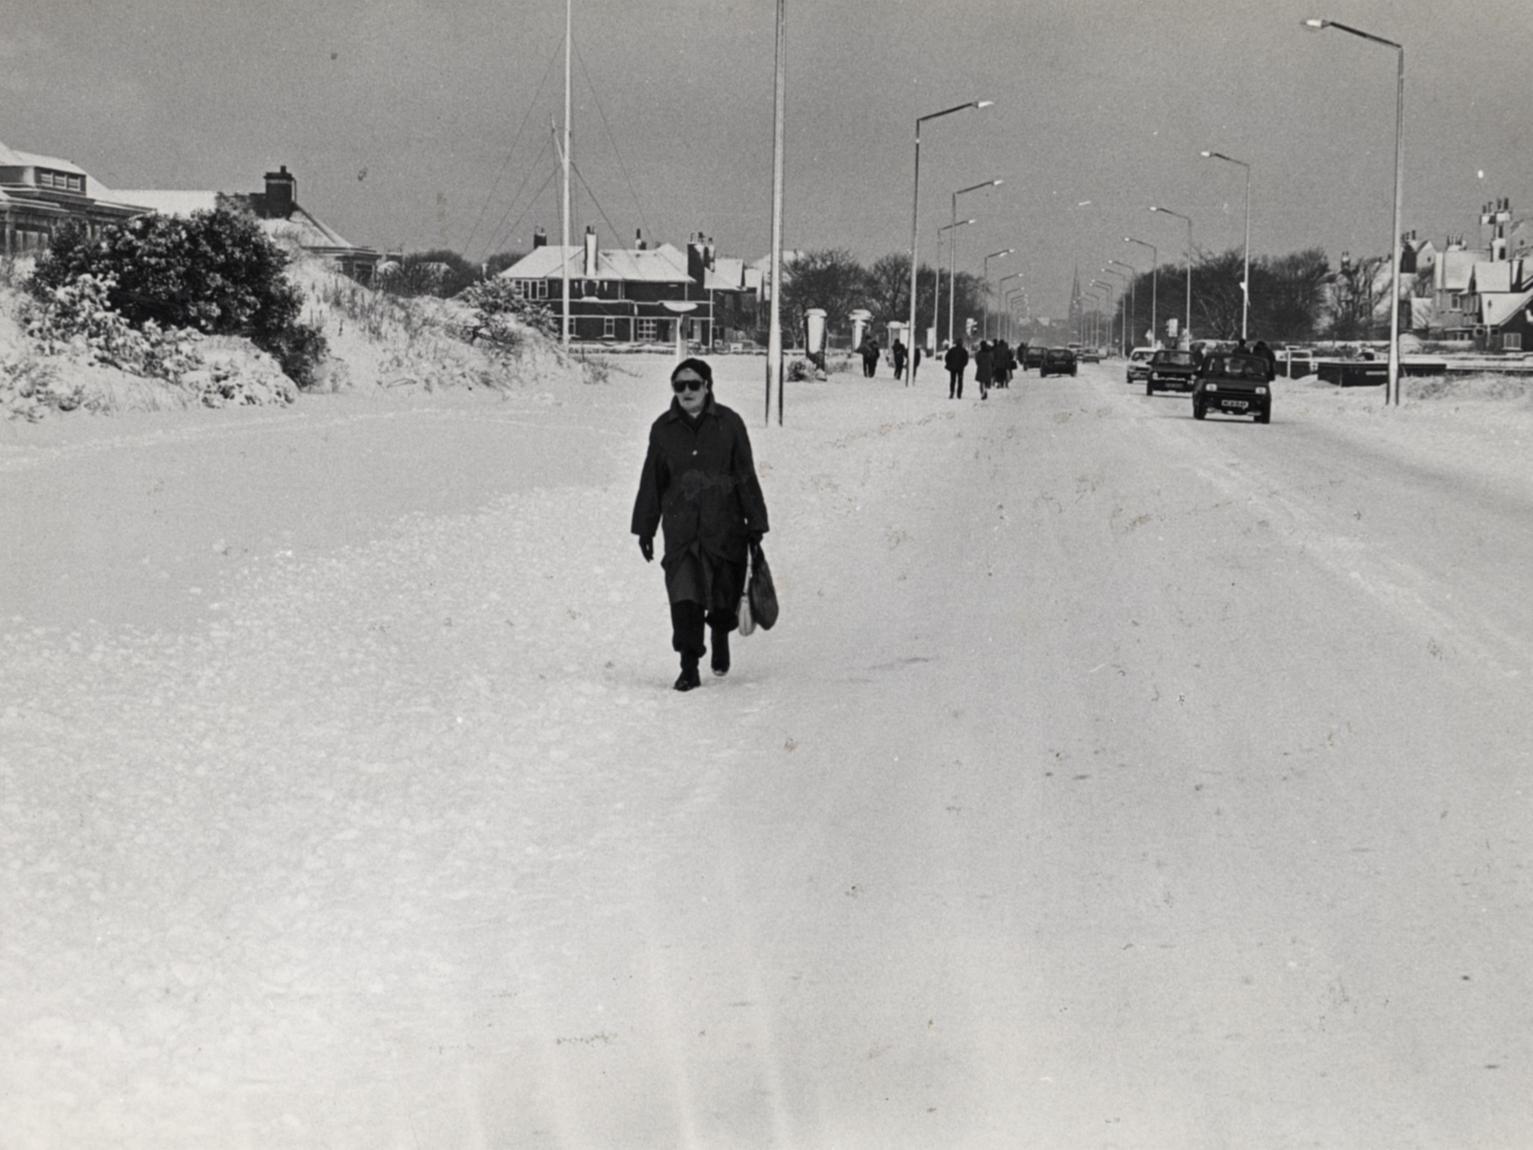 Thousands of Fylde Folk opted to walk to work rather than risk dicing with ice on the road. This was the scene near Queen Mary School, St Annes, 1982